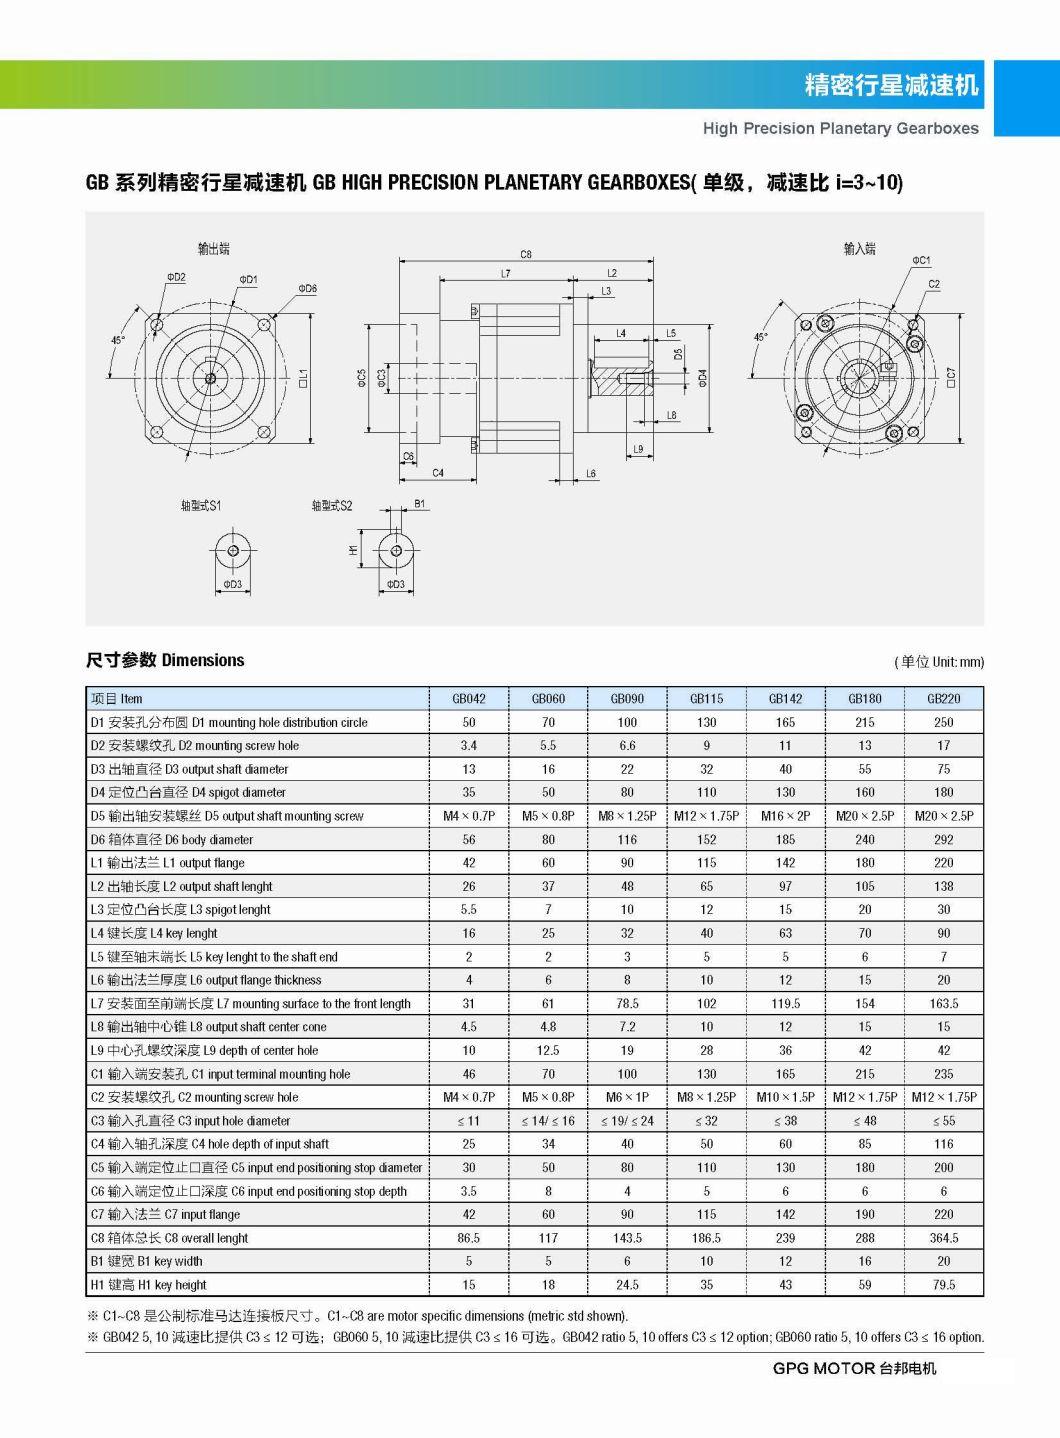 Planetary Gearbox, Premision Planetary Gearbox, Match with Brushless Motor, Center Shaft Gearbox